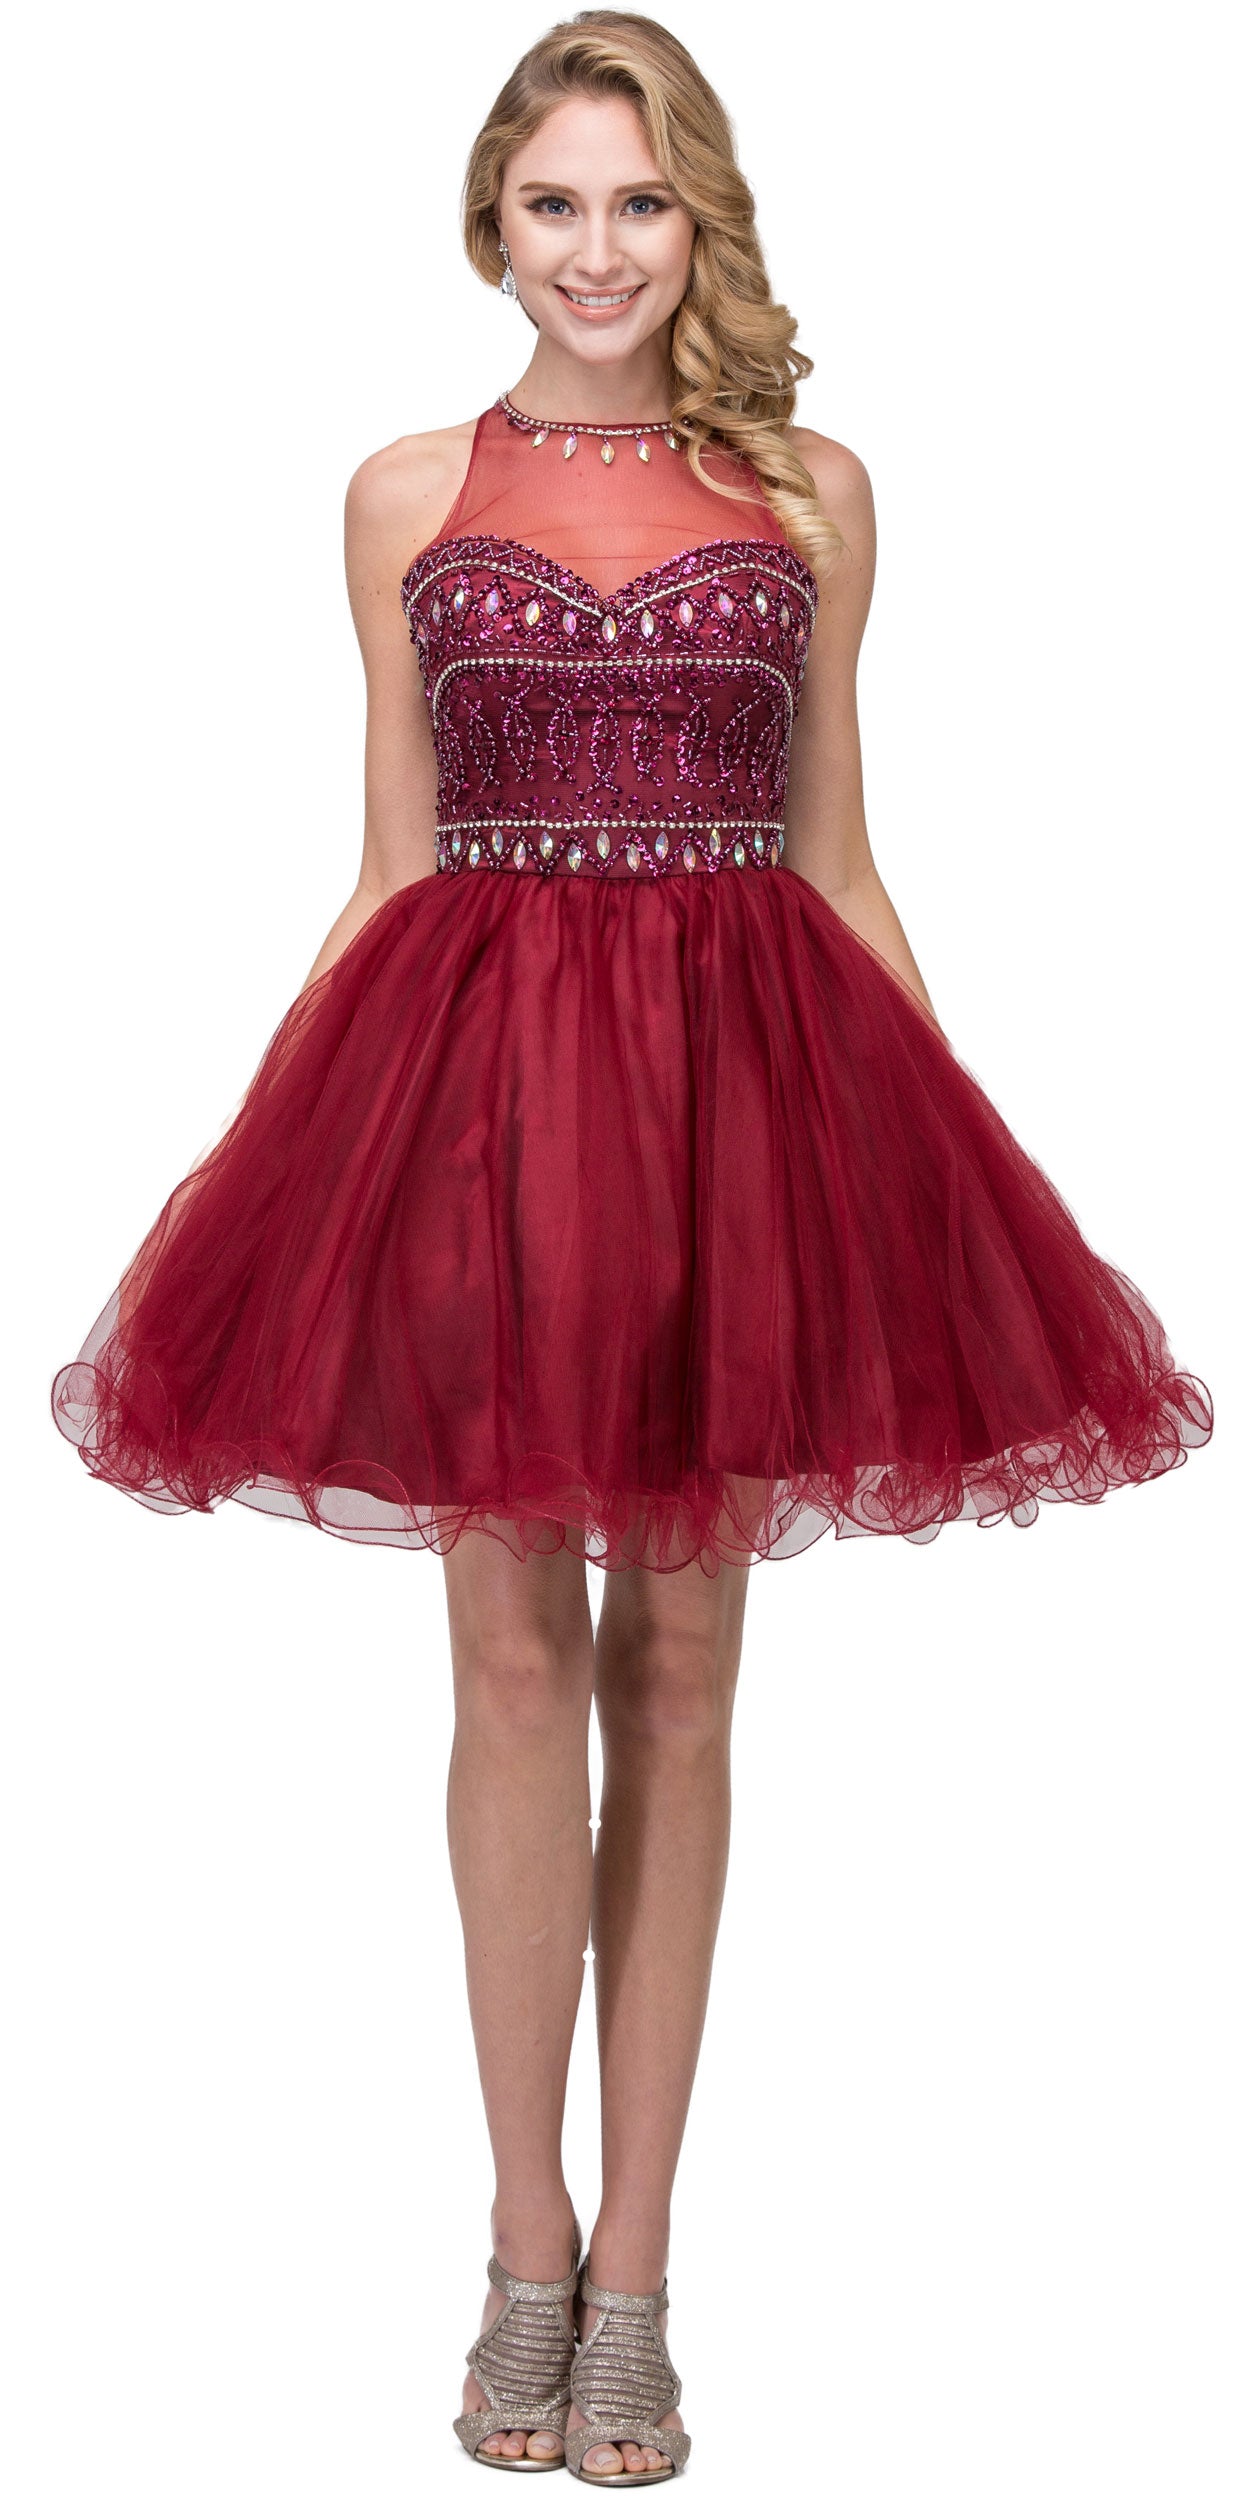 Image of High Neck Bejeweled Bodice Mesh Short Homecoming Dress in Burgundy